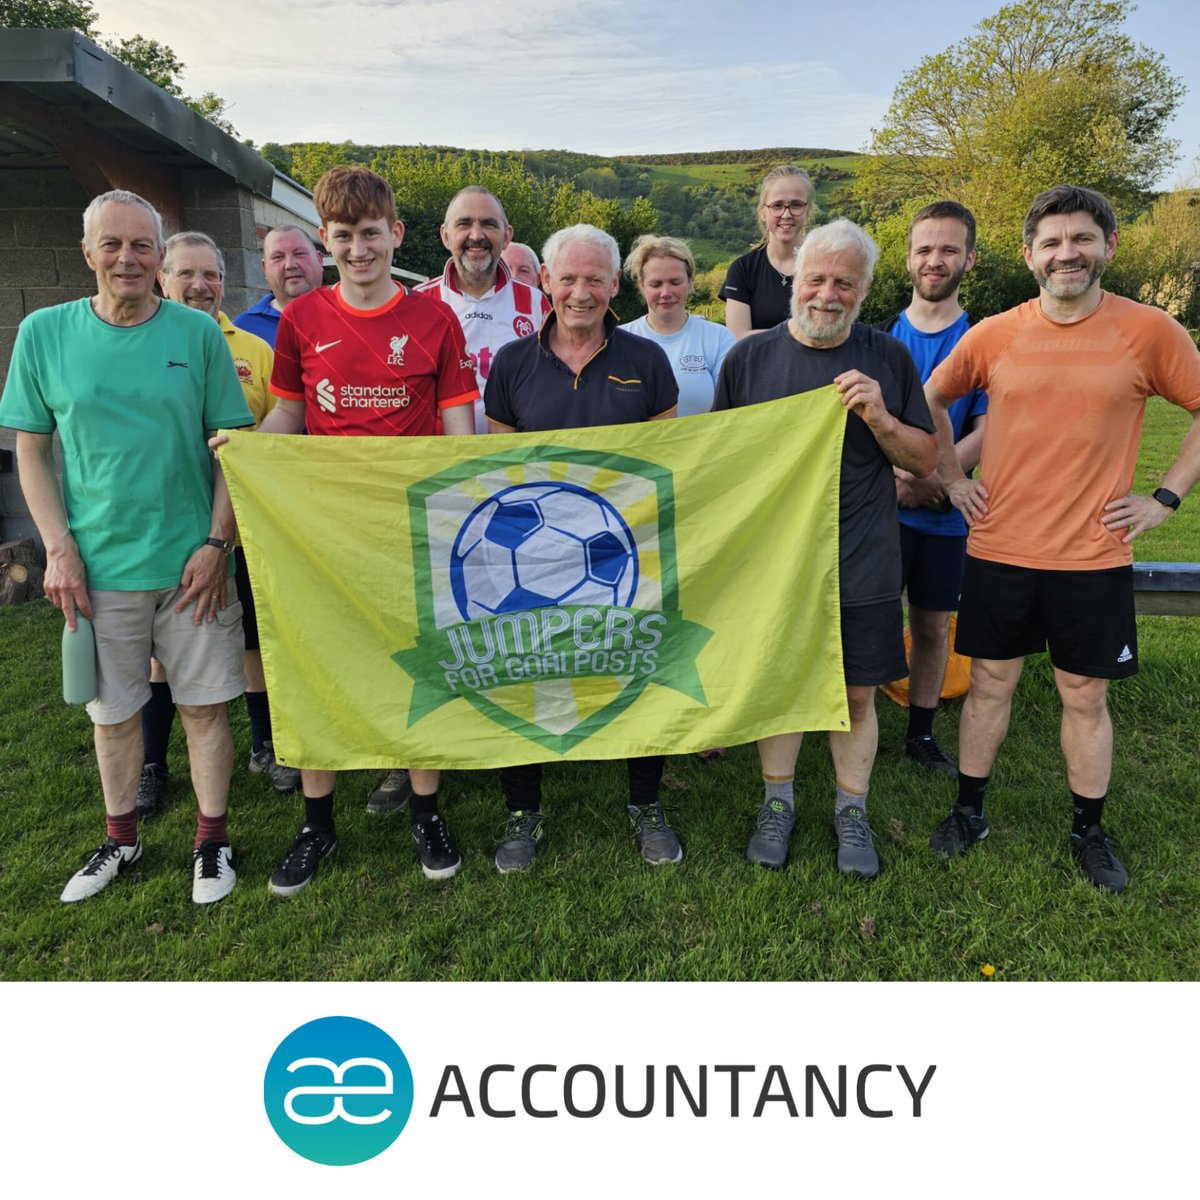 💛💙💚
Tonight's walking football group. Great fun. Thank you all

If you would like to play please get in touch 

#jumpersforgoalposts #walkingfootball #footballforall #footballfun
#makeyoufeelbetter #gettingout